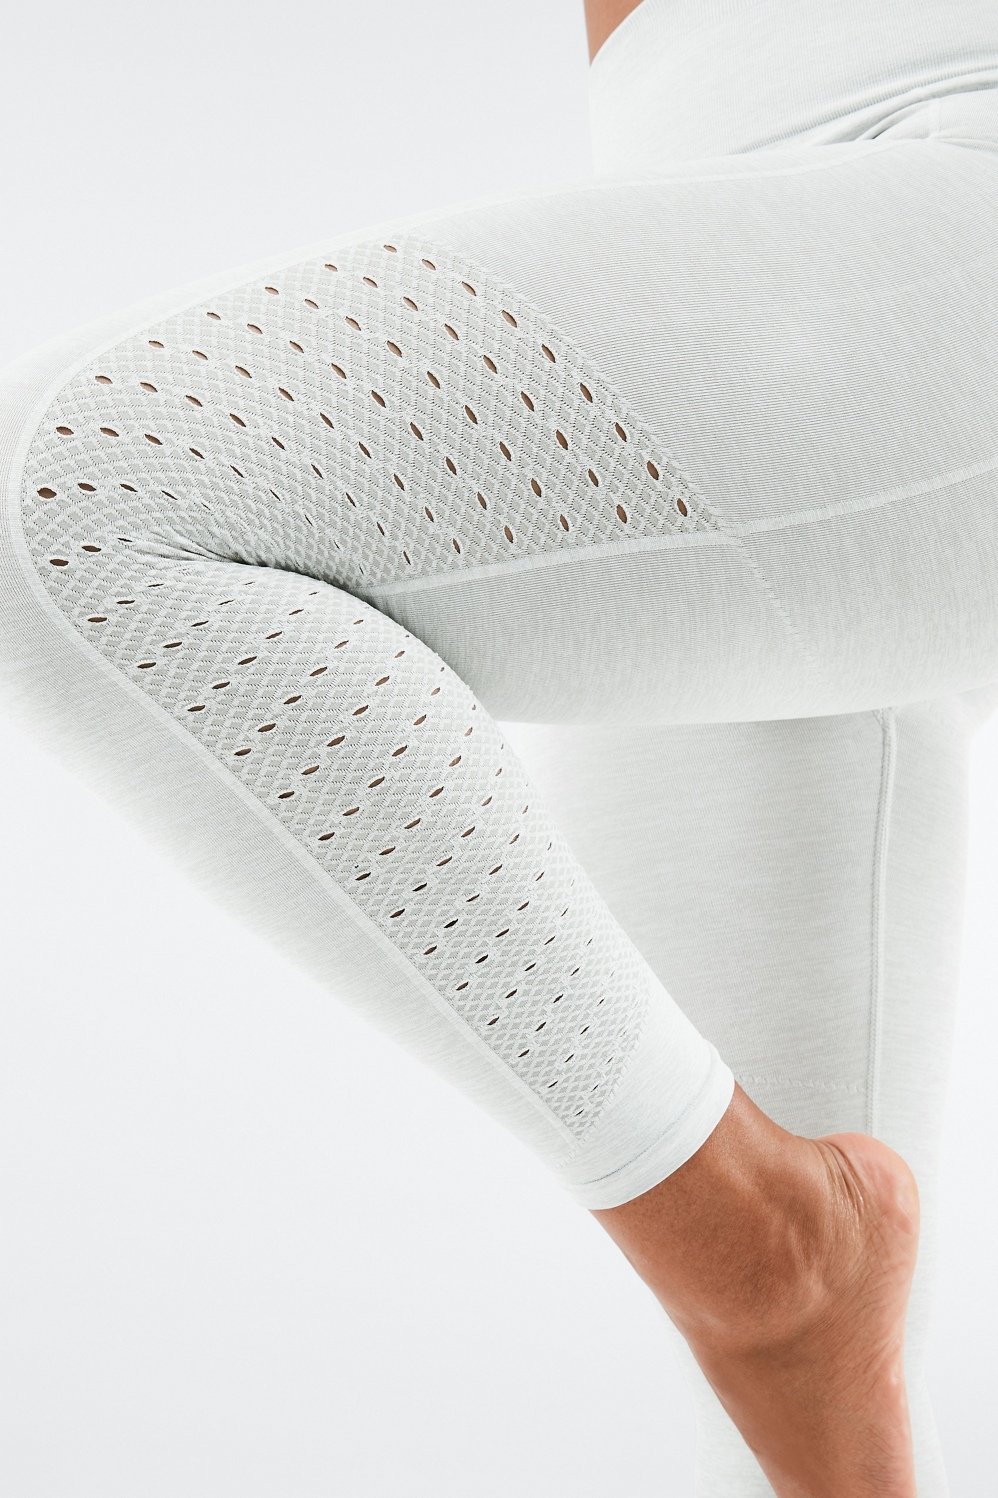 Fabletic Sync Seamless High-Waisted 7/8 Legging - $28 - From Amy